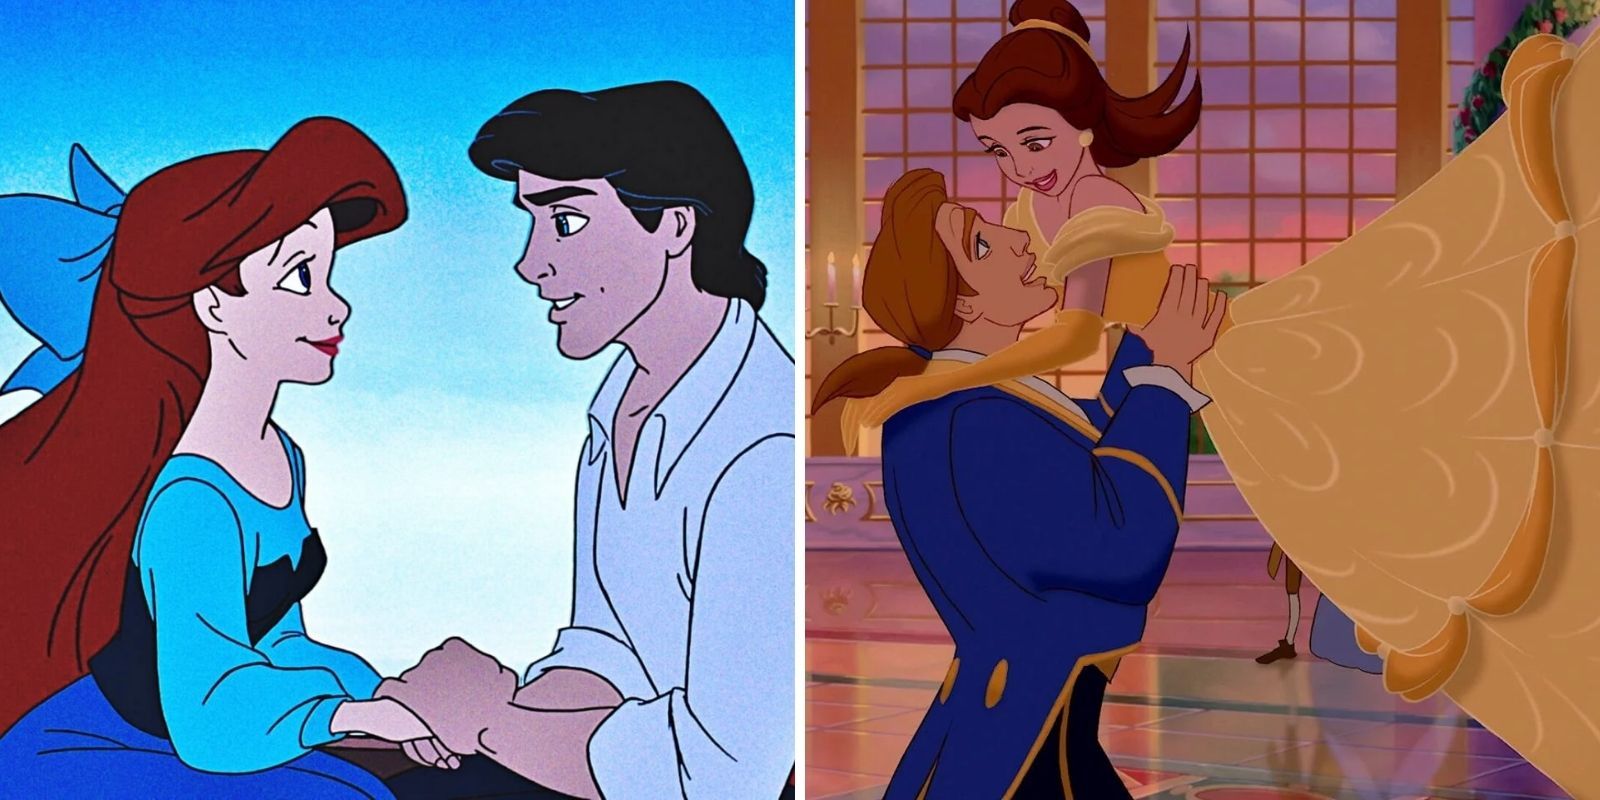 Disney Couples Ariel and Eric The Little Mermaid vs Belle and Adam Beauty and the Beast